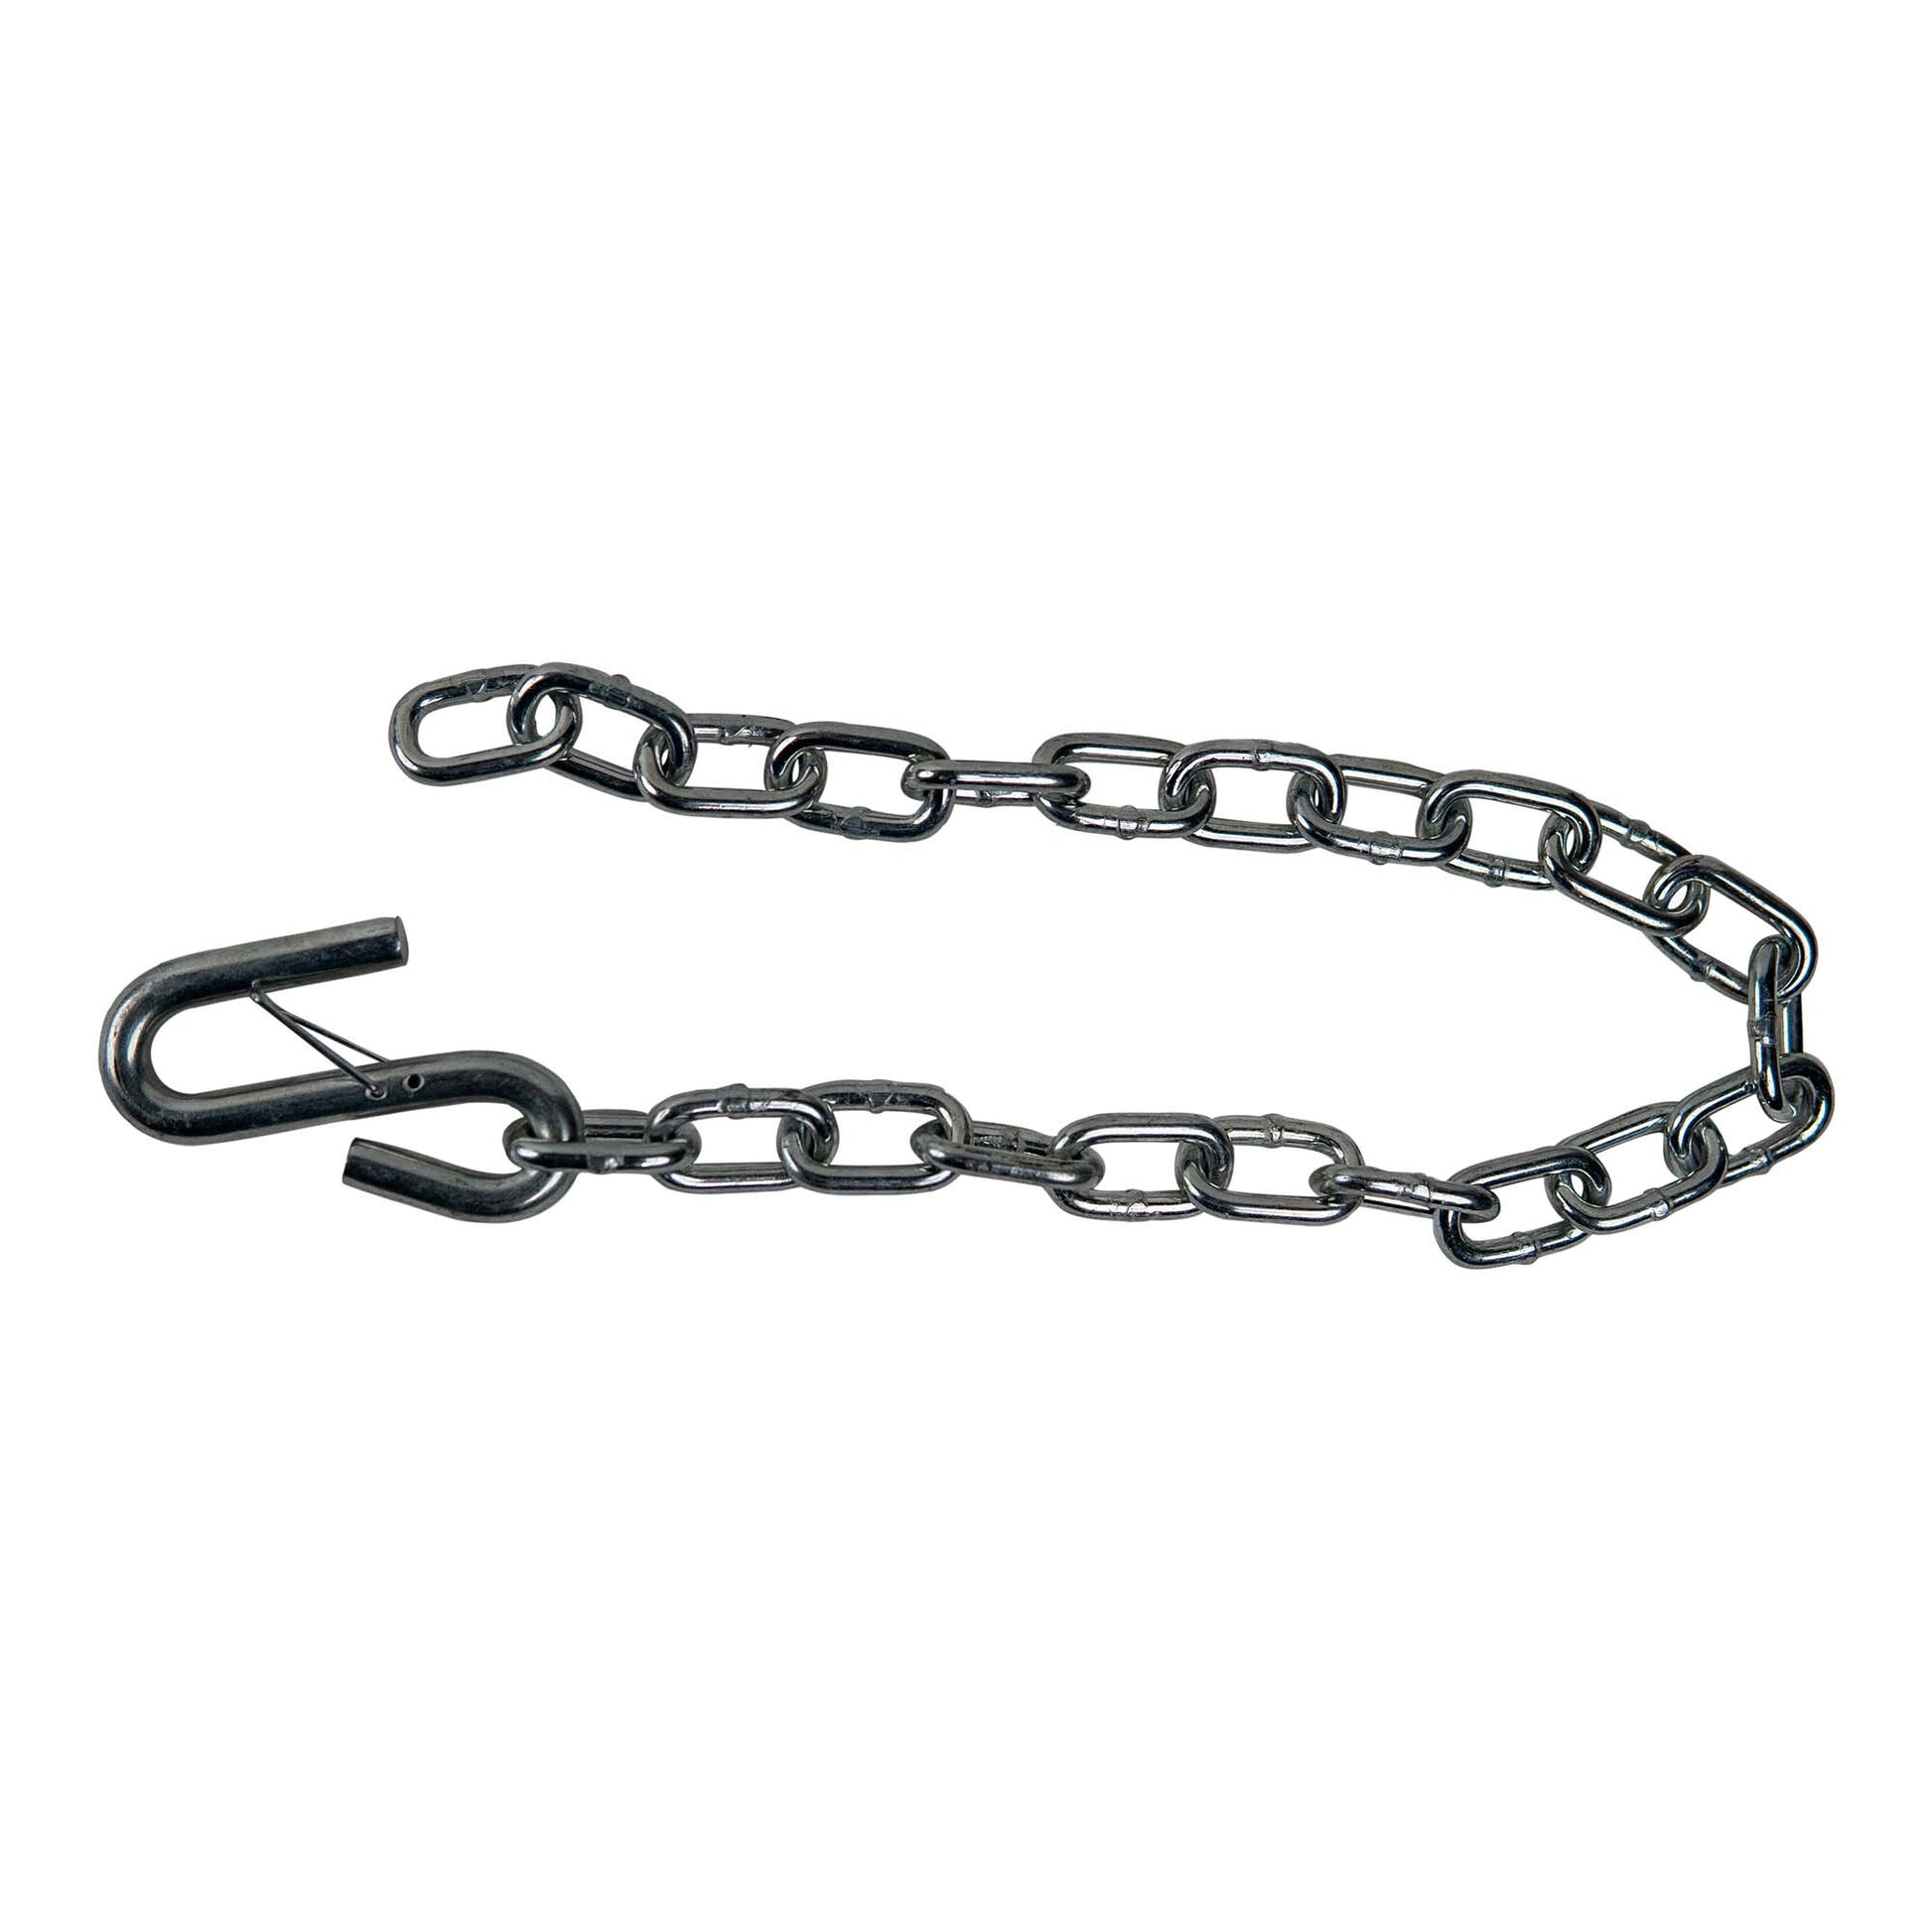 Silver Trailer Safety Chain - 1/4x31" (5k Capacity) - The Trailer Parts Outlet